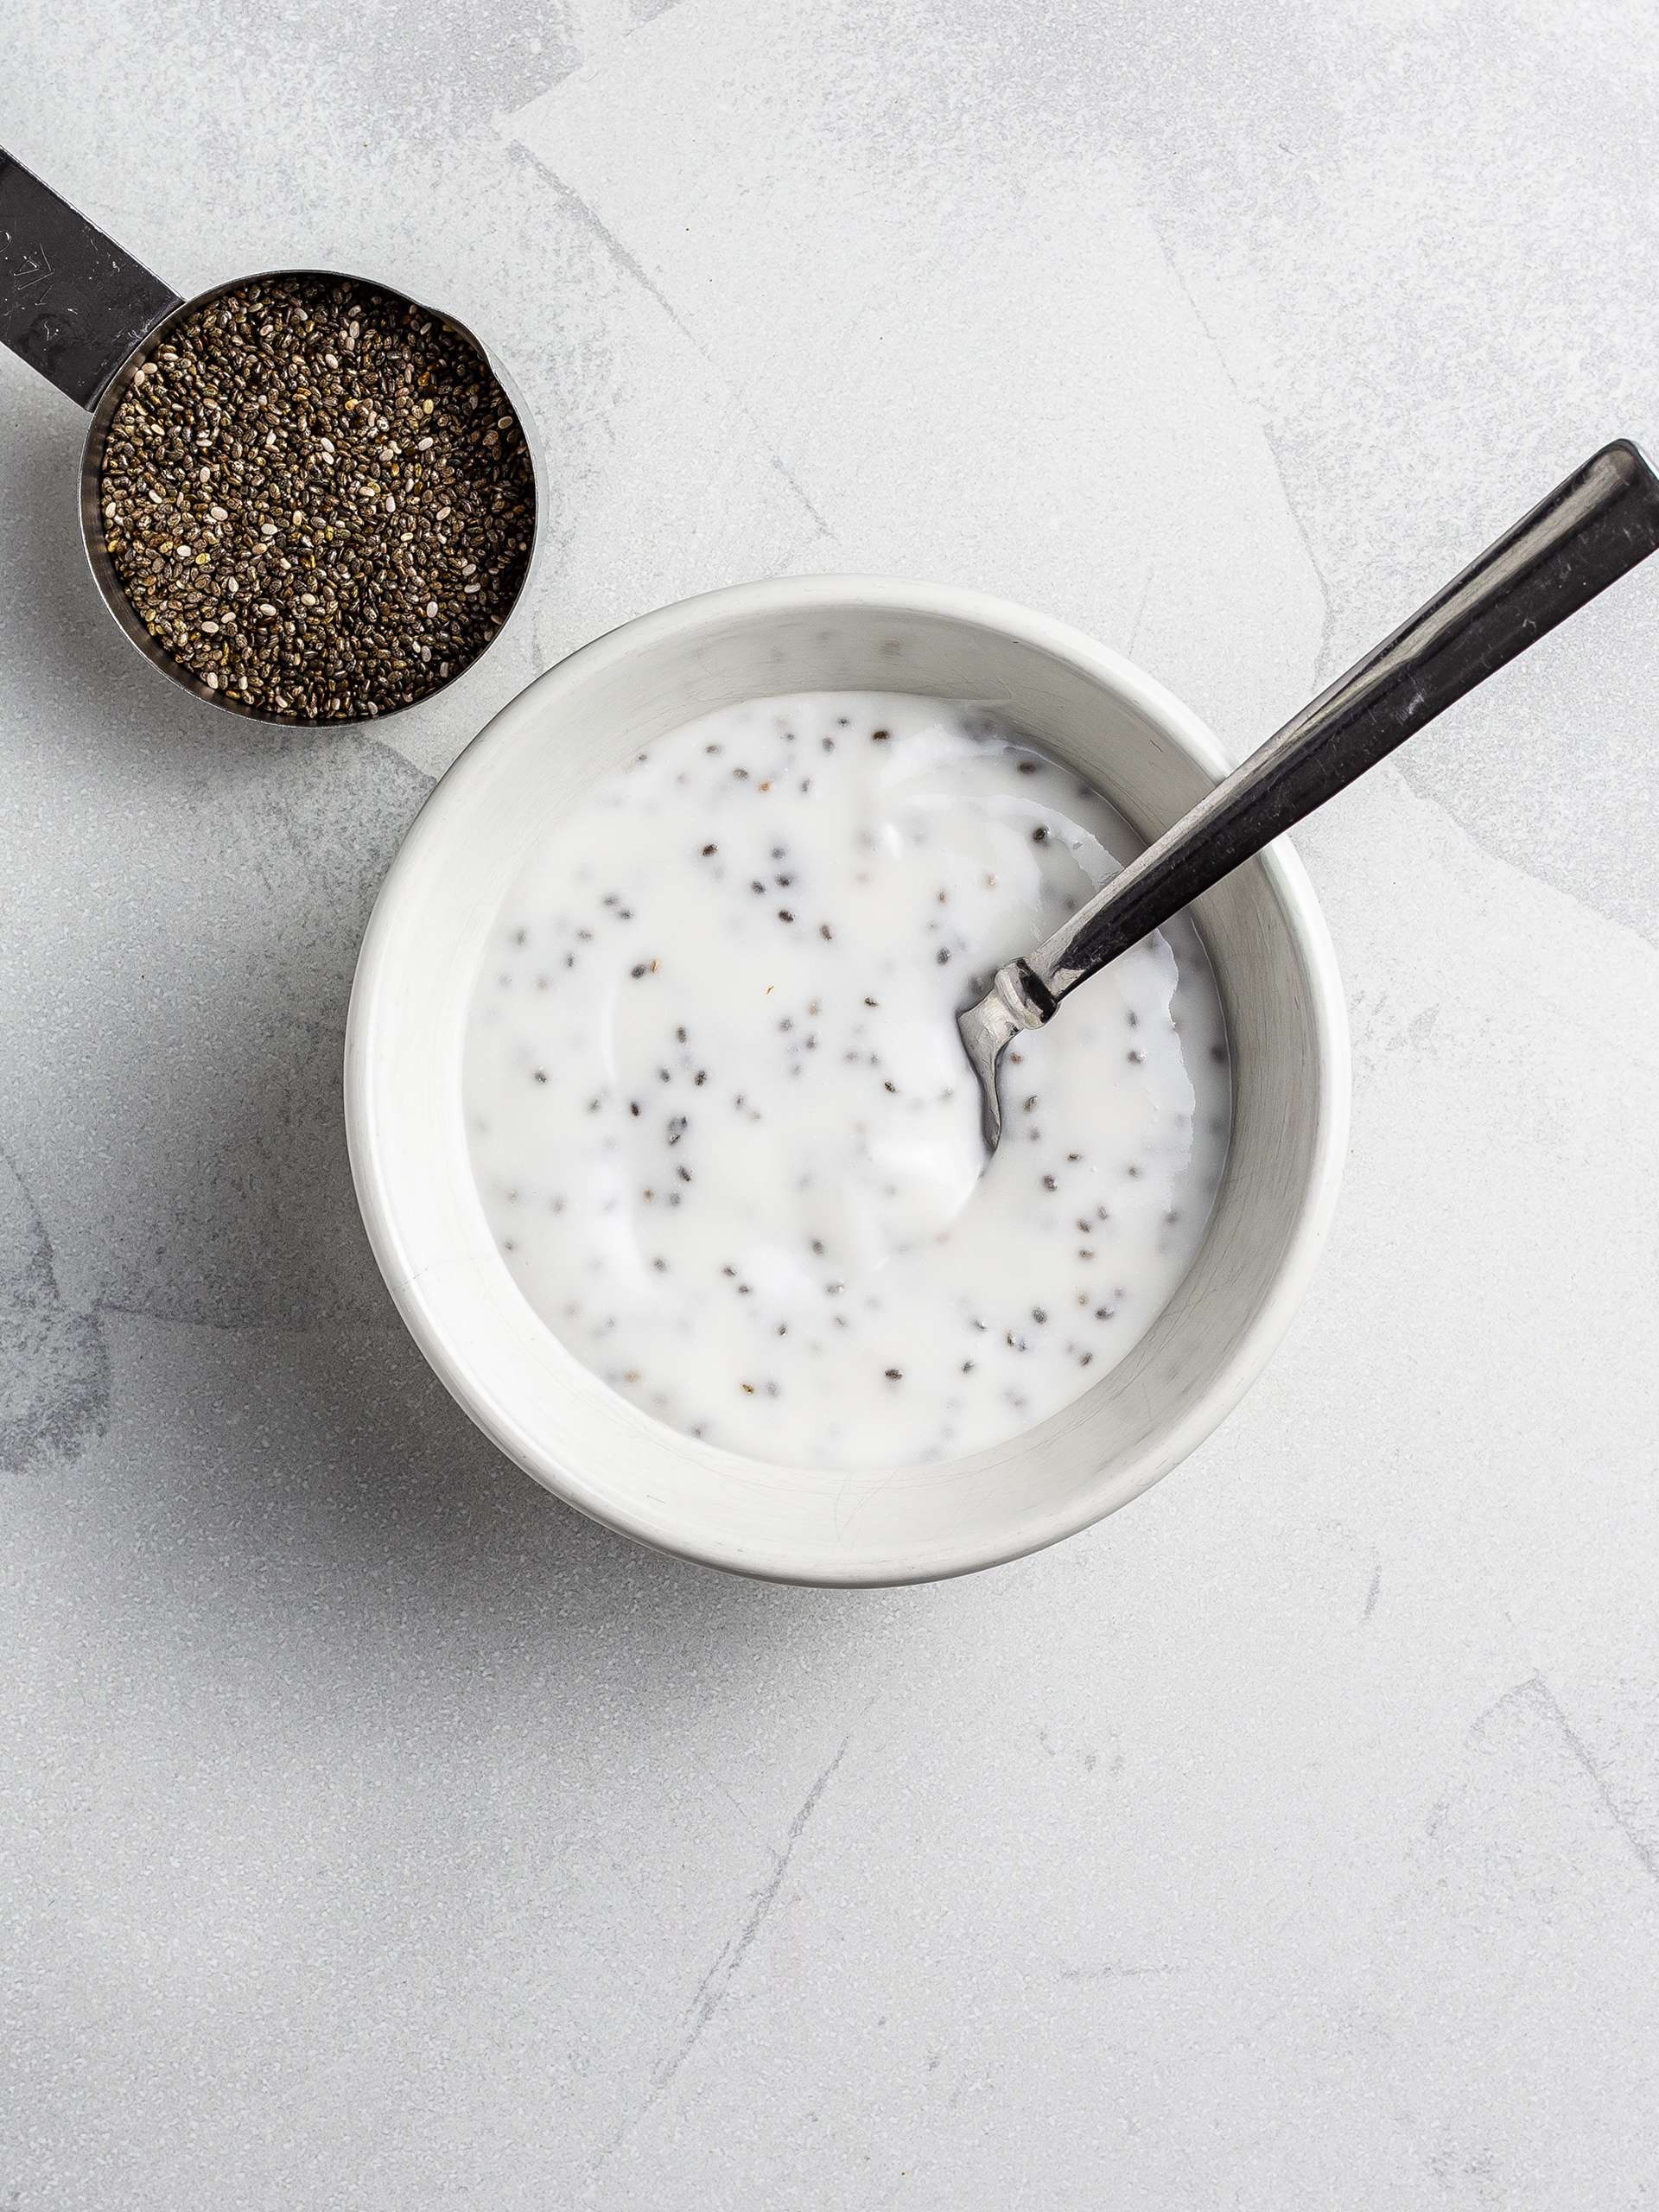 Soy yogurt mixed with chia seeds